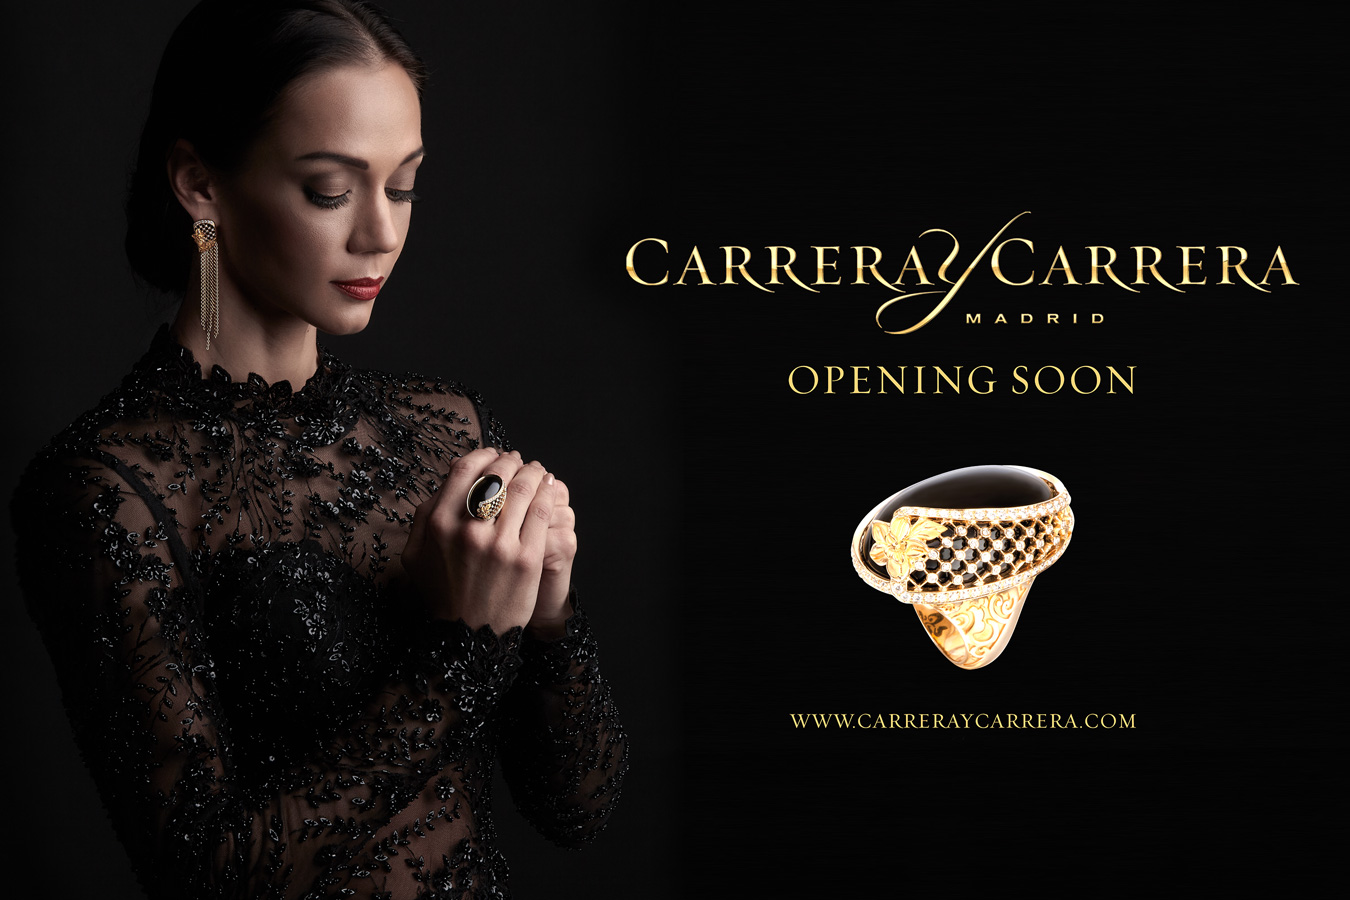 carrera y carrera storefront for Thailand website billboards jewelry luxery brand